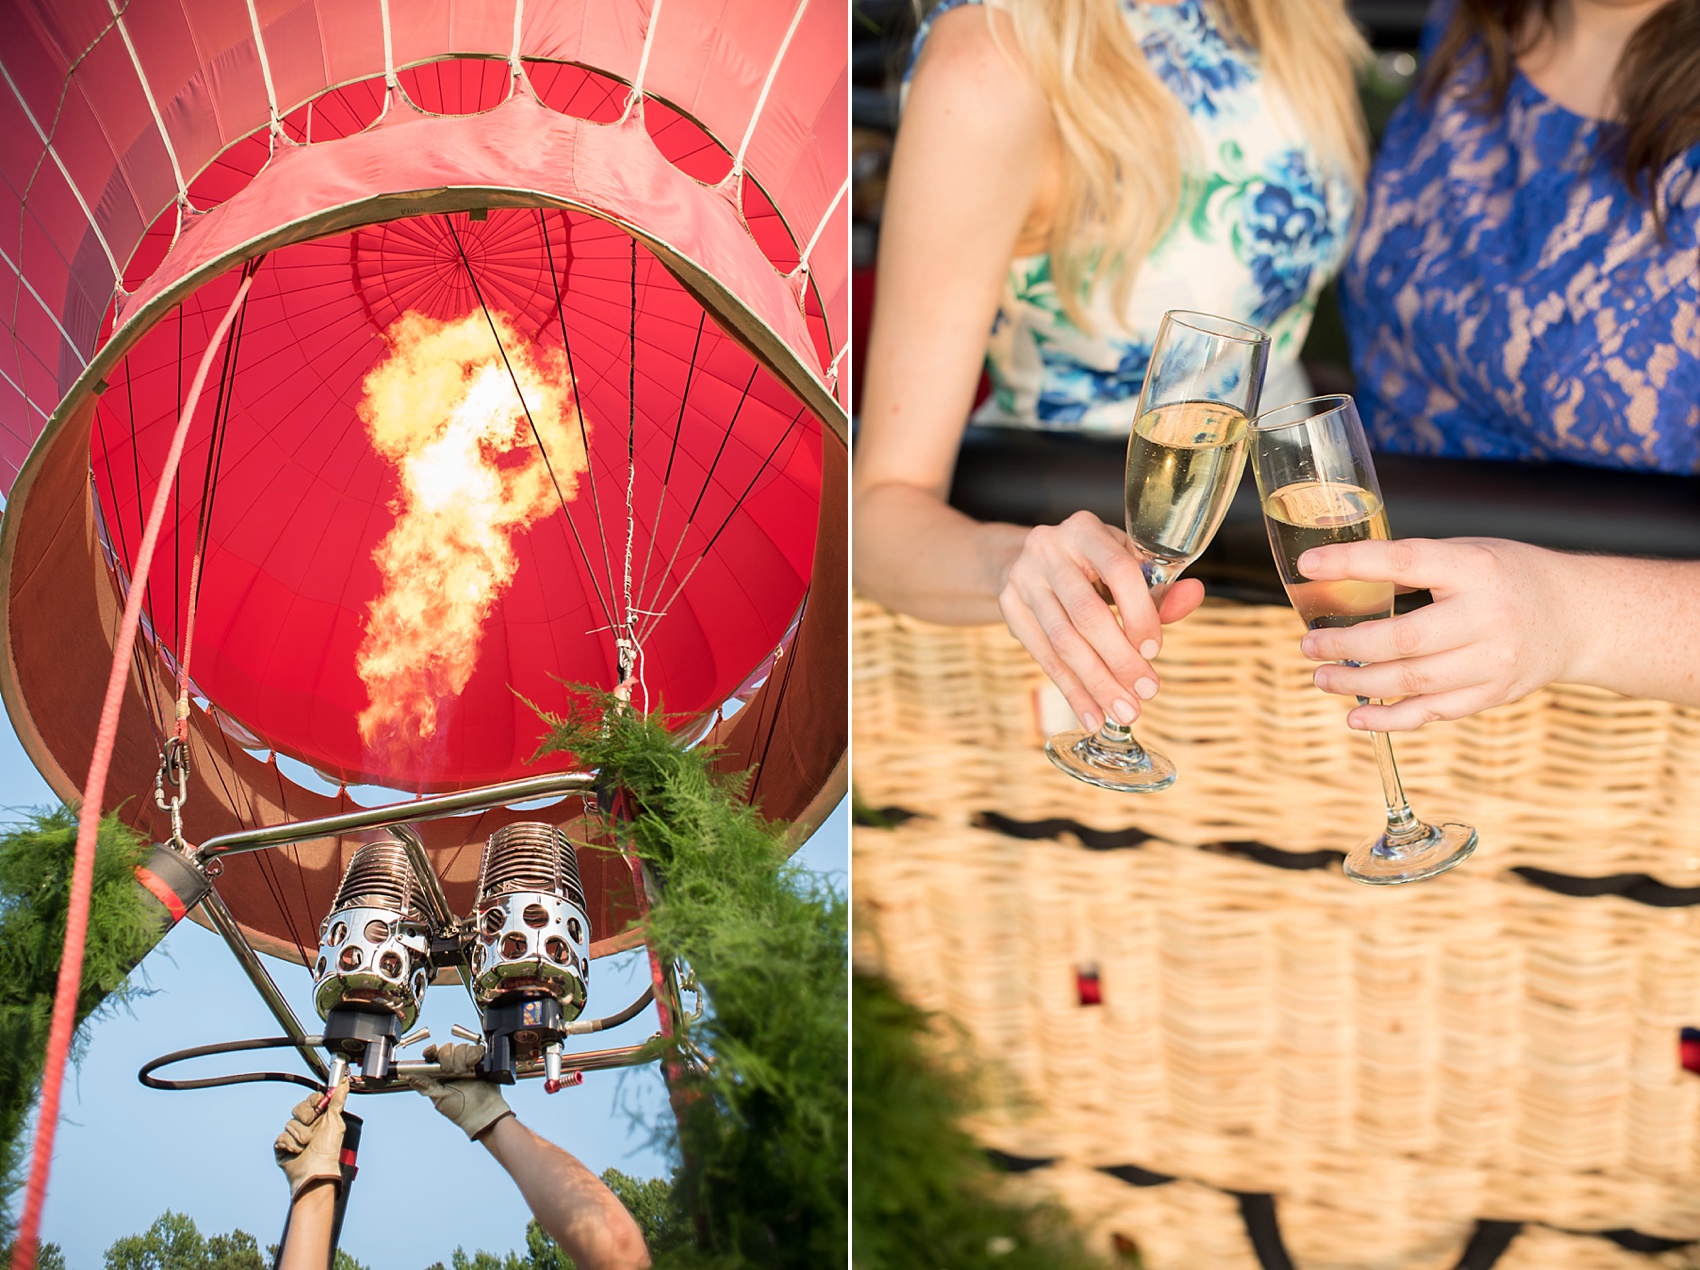 Bennett Bunn Plantation hot air balloon flower field images by Mikkel Paige, Raleigh wedding photographer. Flowers by SE Floral Designs.